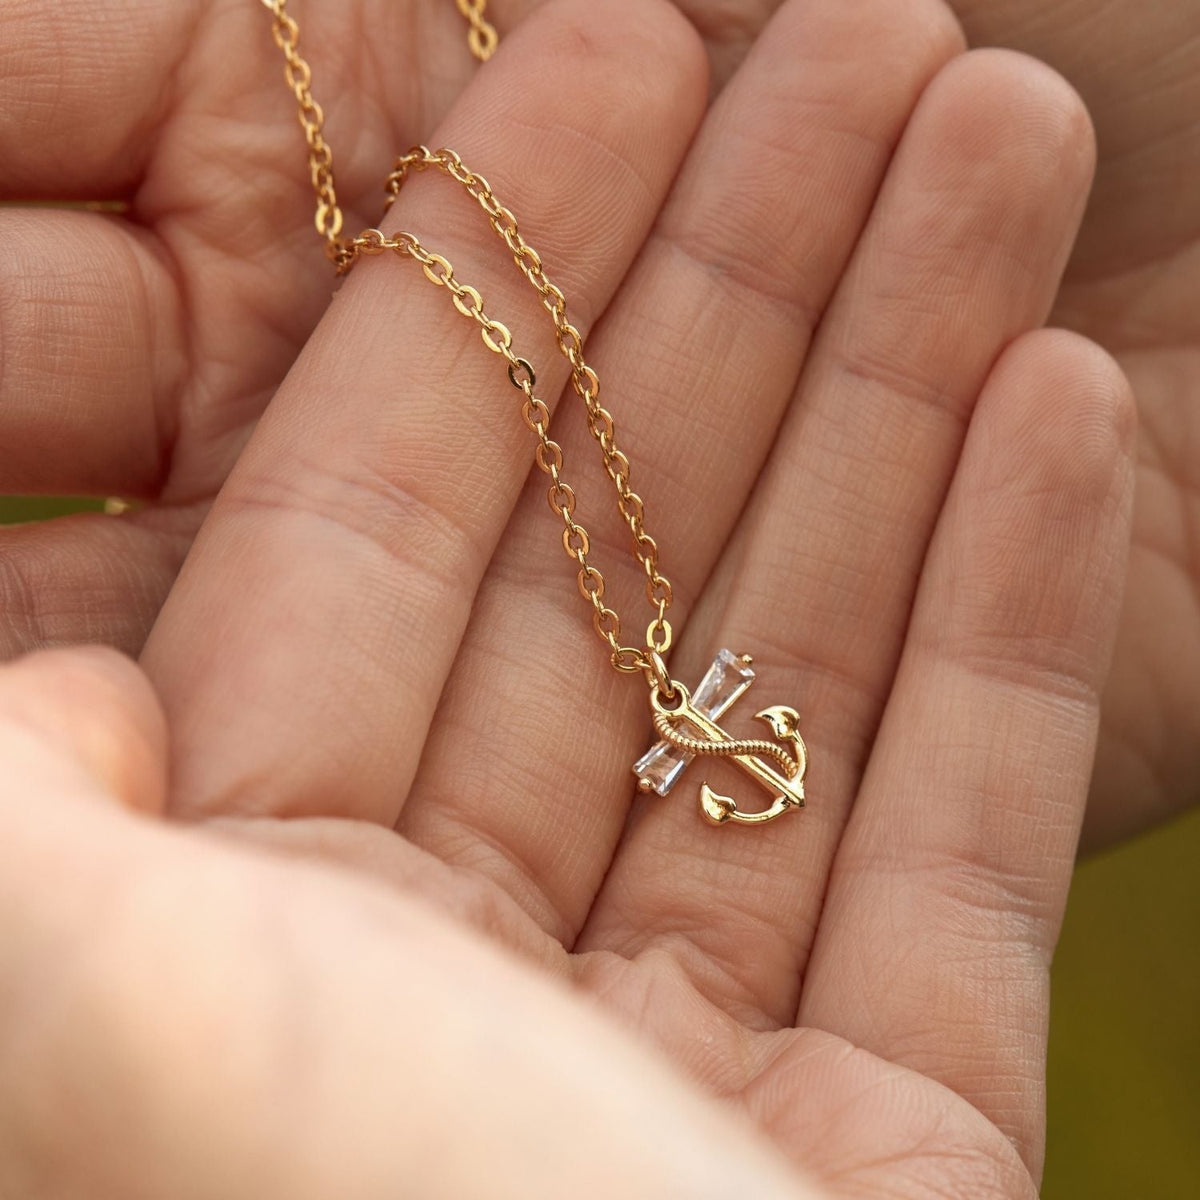 To the Mother of the Bride (From Daughter) | Today a Bride, Tomorrow a Wife | Anchor Necklace